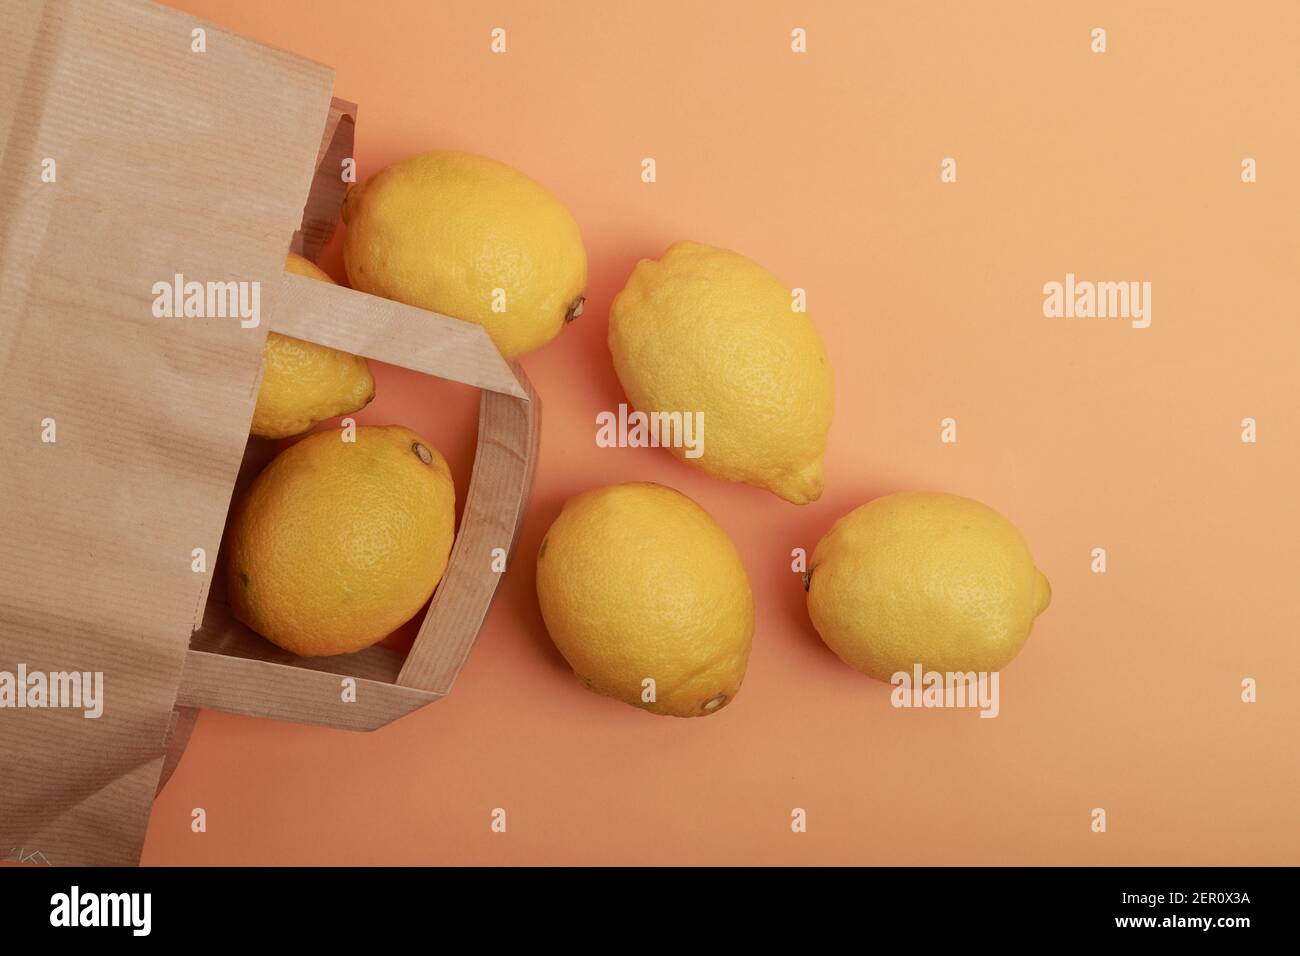 flat lay of several lemons coming out of a supermarket paper bag on orange background Stock Photo